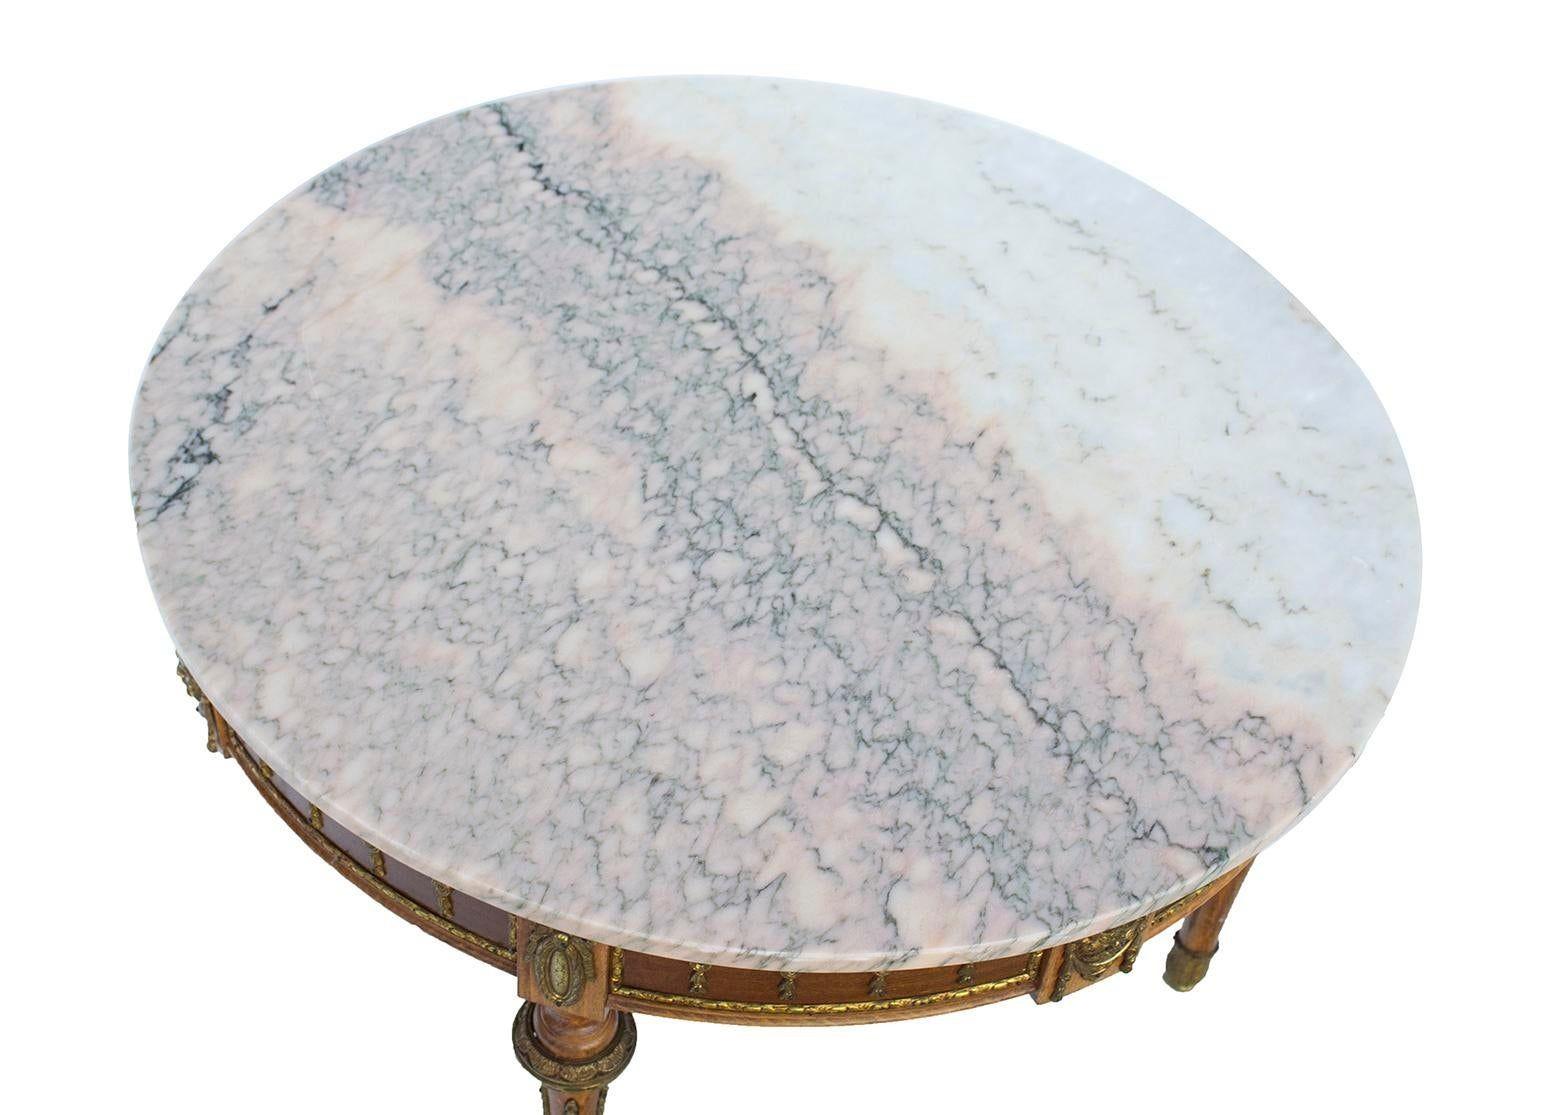 Likely Italy, 1940s
Beautiful smaller round cocktail table with a gorgeous pink marble top and an Vintage base. Brass detailing around the edges of the table and on each of the four legs. Mix with any style.
CONDITION NOTES: Light marks to